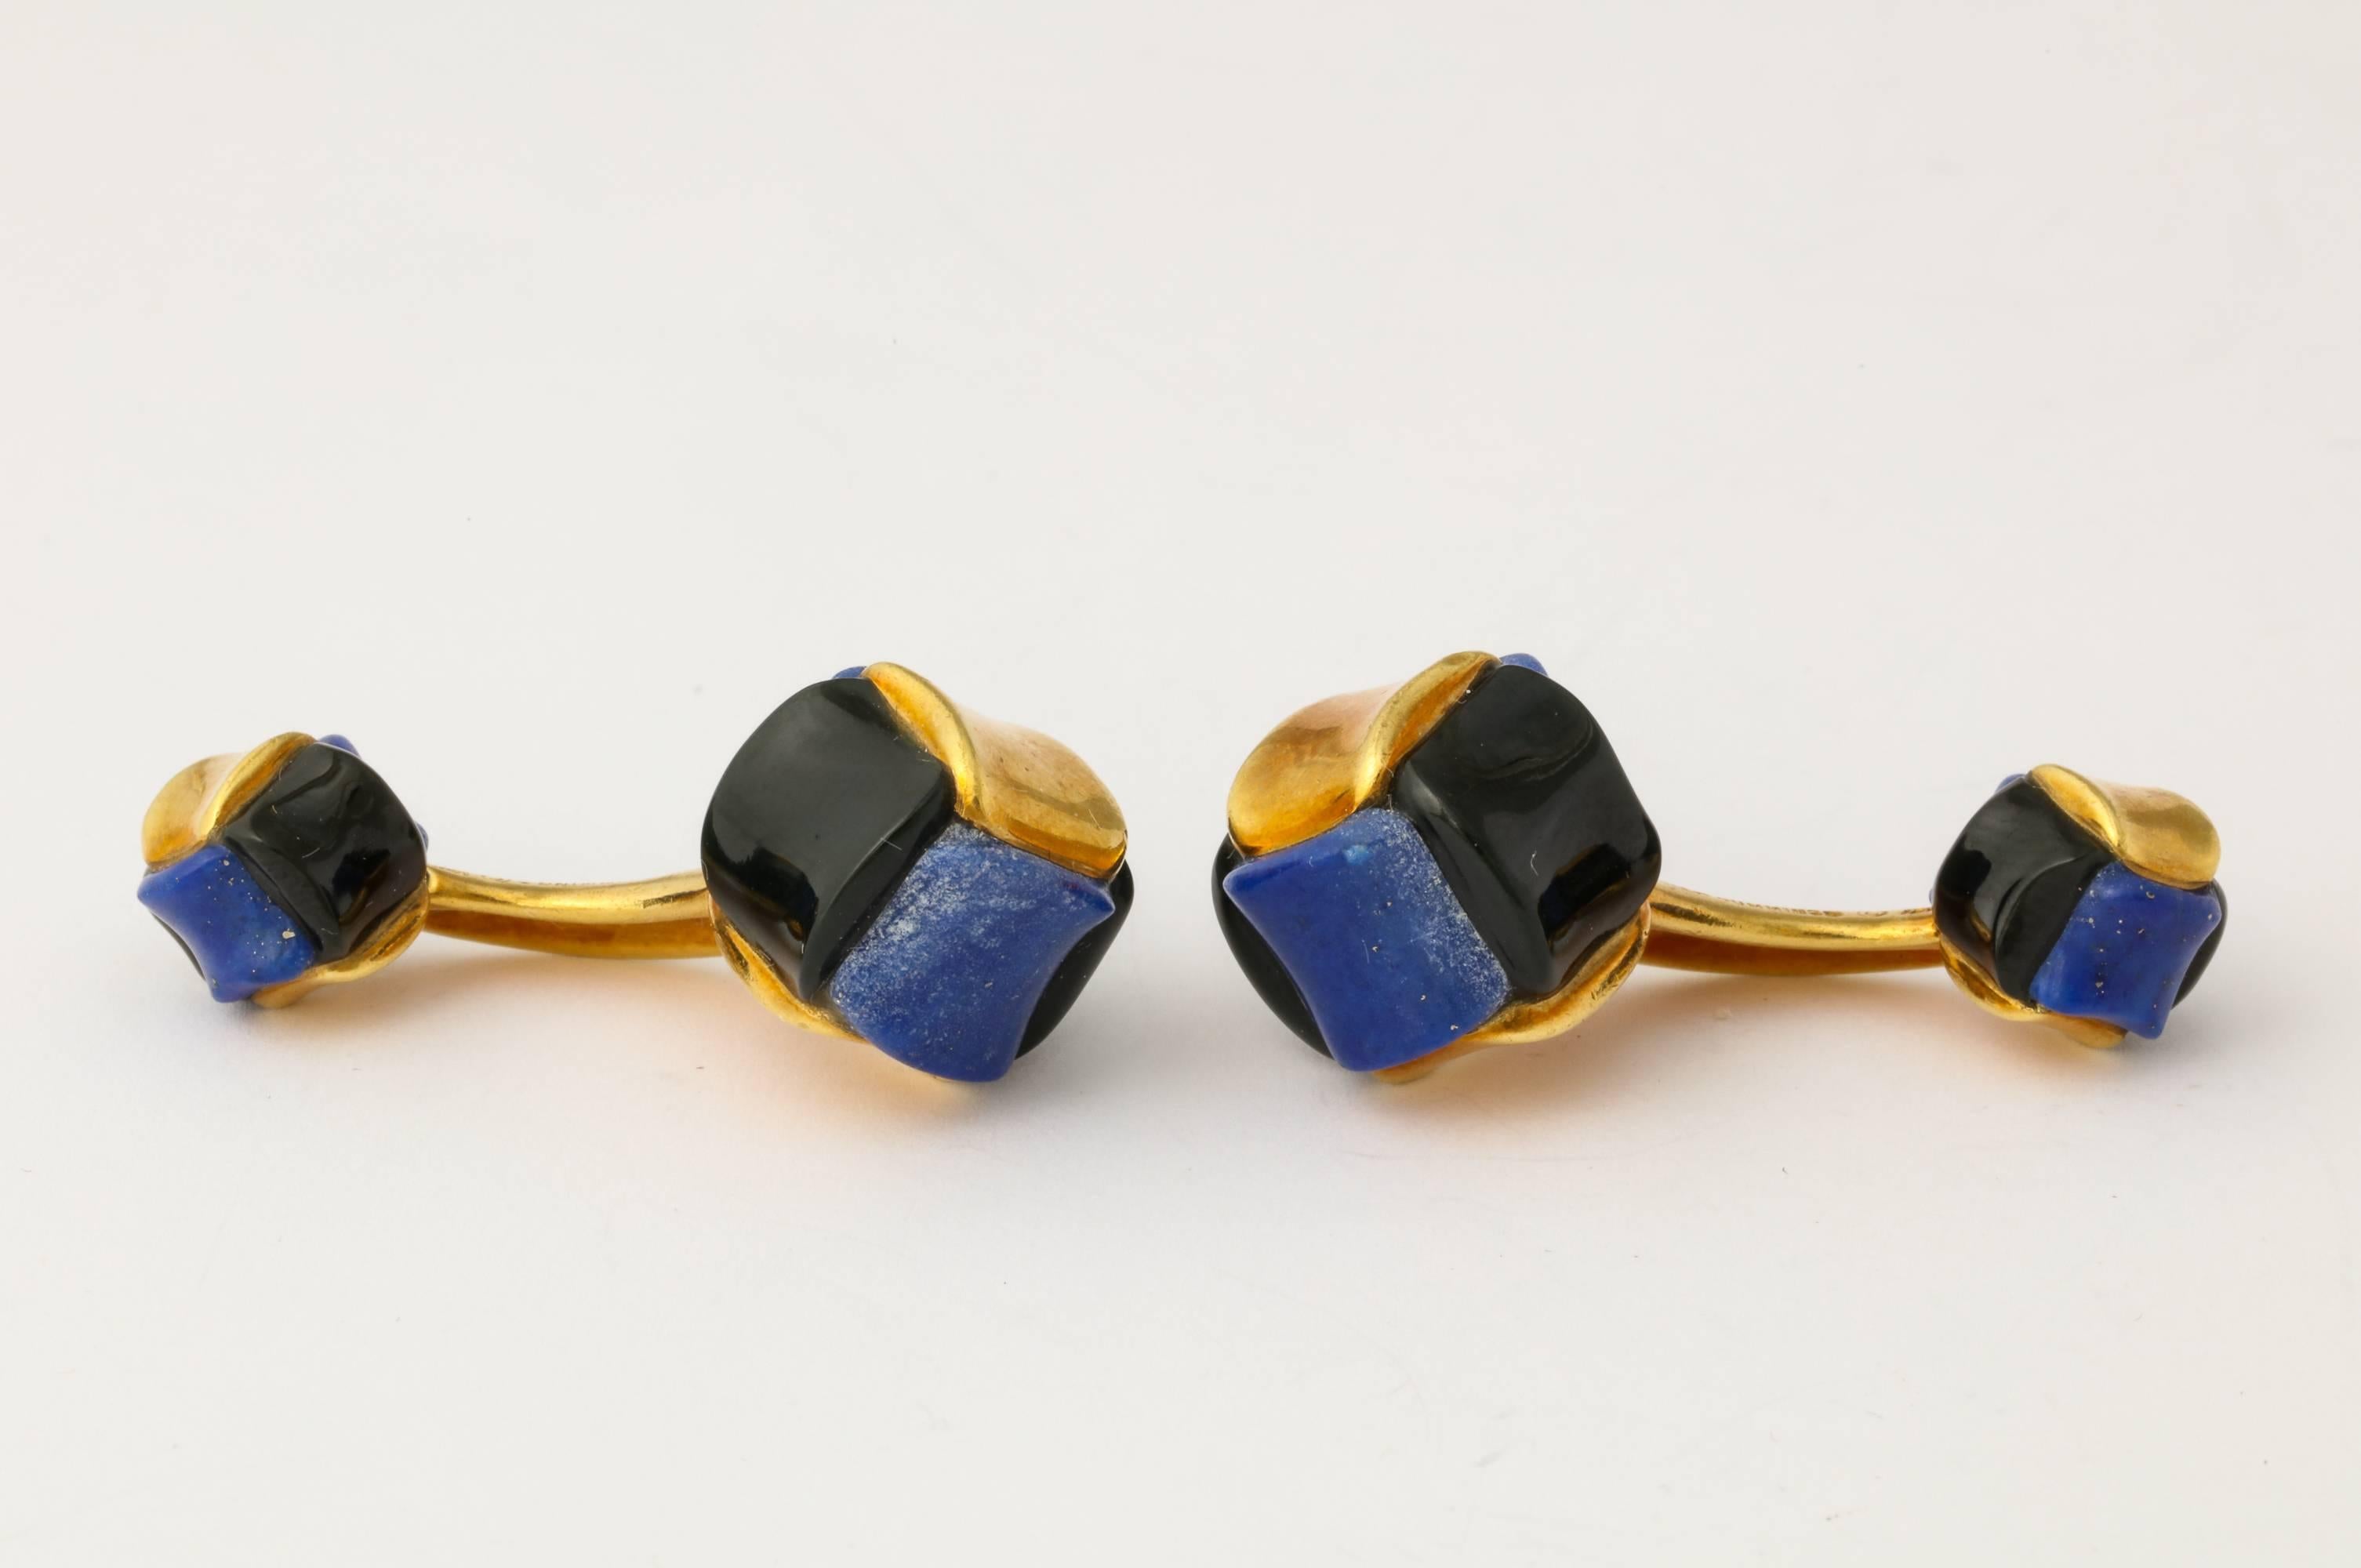 Handsome and one-of-a-kind pair of cufflinks by Angela Cummings, custom ordered c1985, of 18K gold set with carved lapis lazuli and black jade, with an accent of translucent brown enamel in the connecting bar. Marked: Angela Cummings 18K. Largest